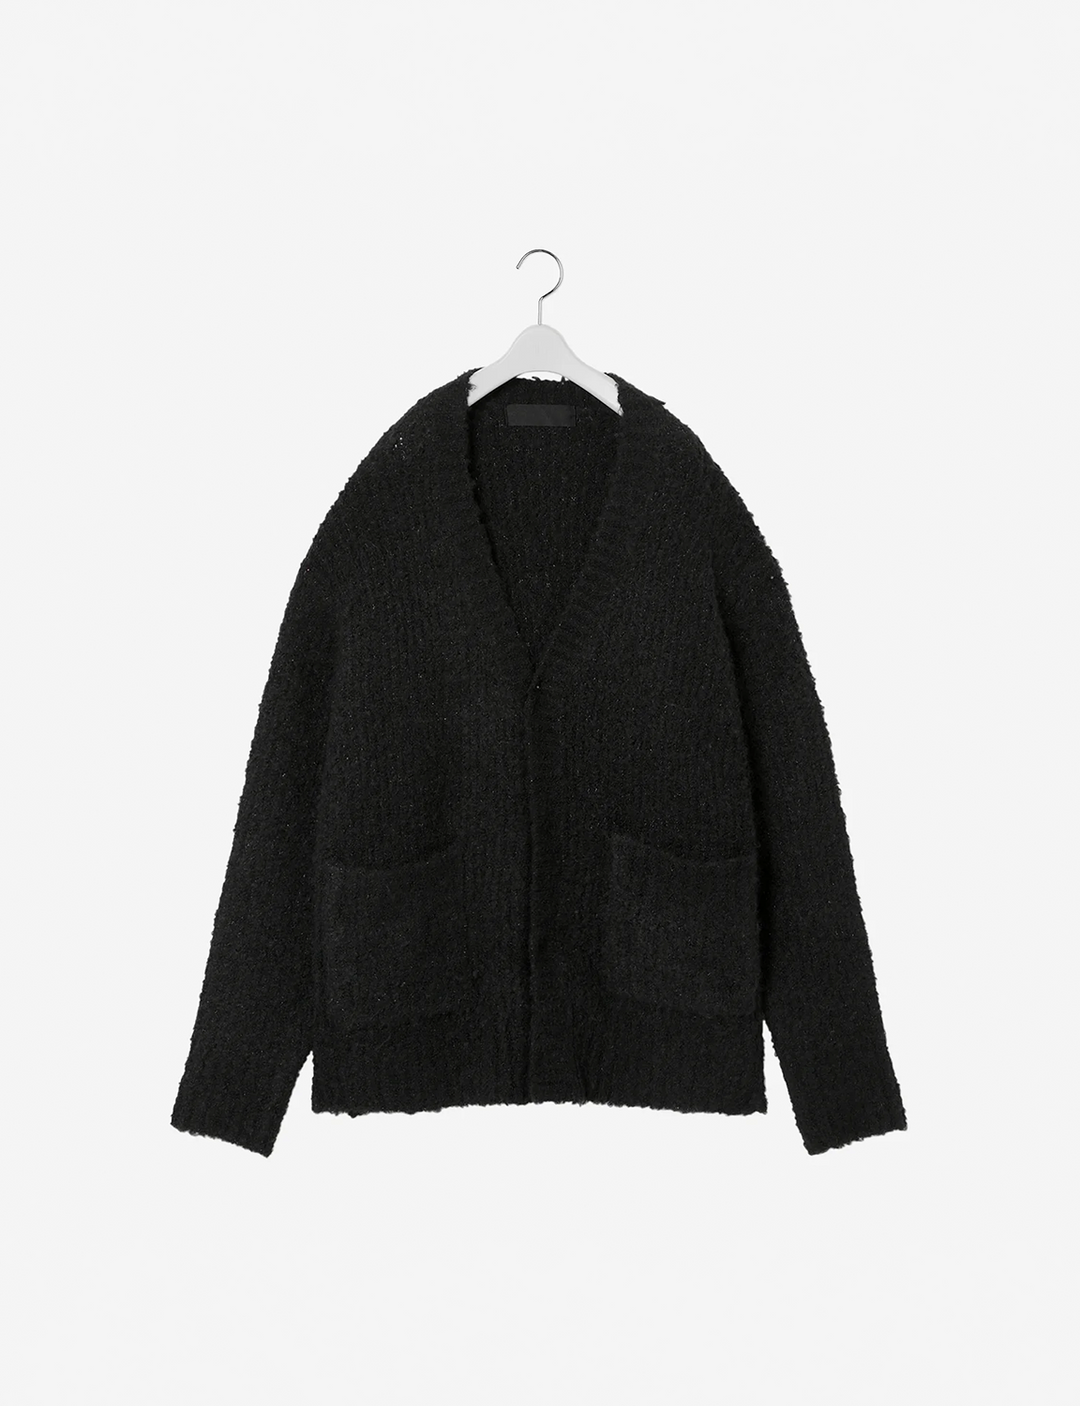 th products - Inflated Cardigan / black – The Contemporary Fix Kyoto